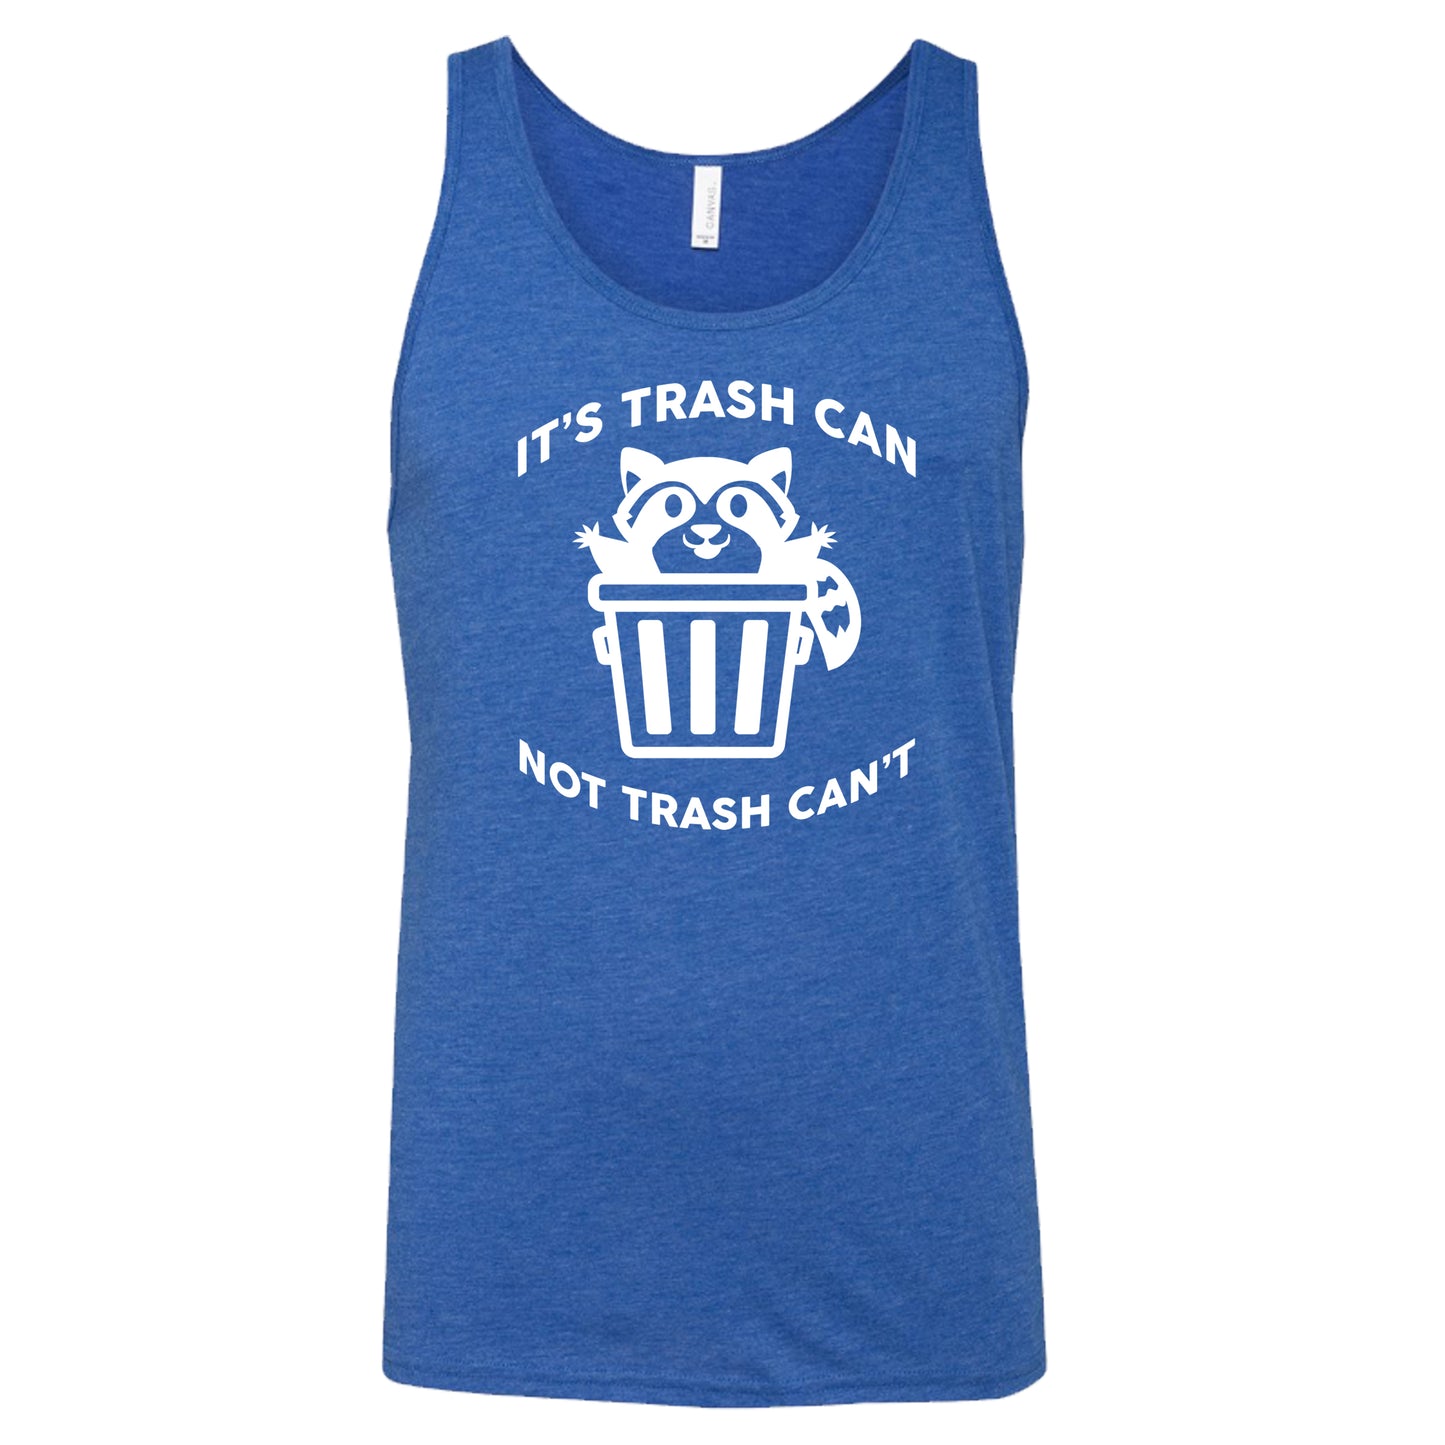 It's Trash Can Not Trash Can't Shirt Unisex